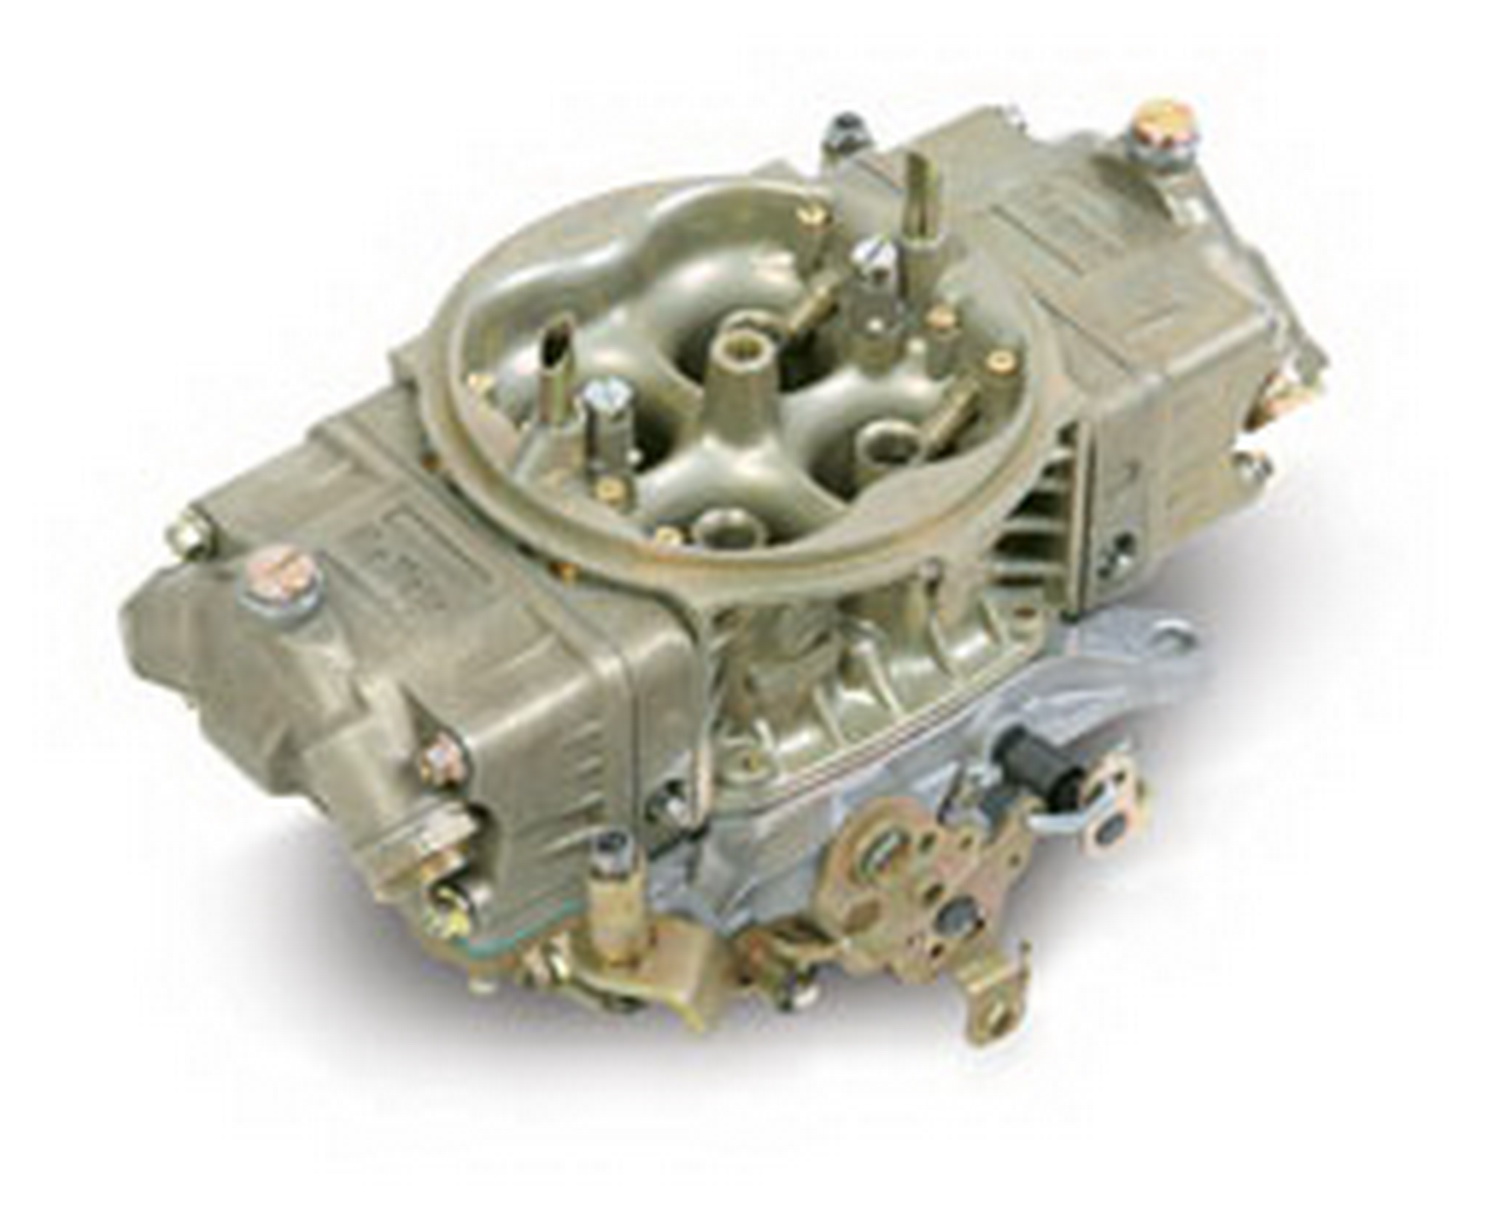 Holley Performance Holley Performance 0-80498-1 Race Carburetor